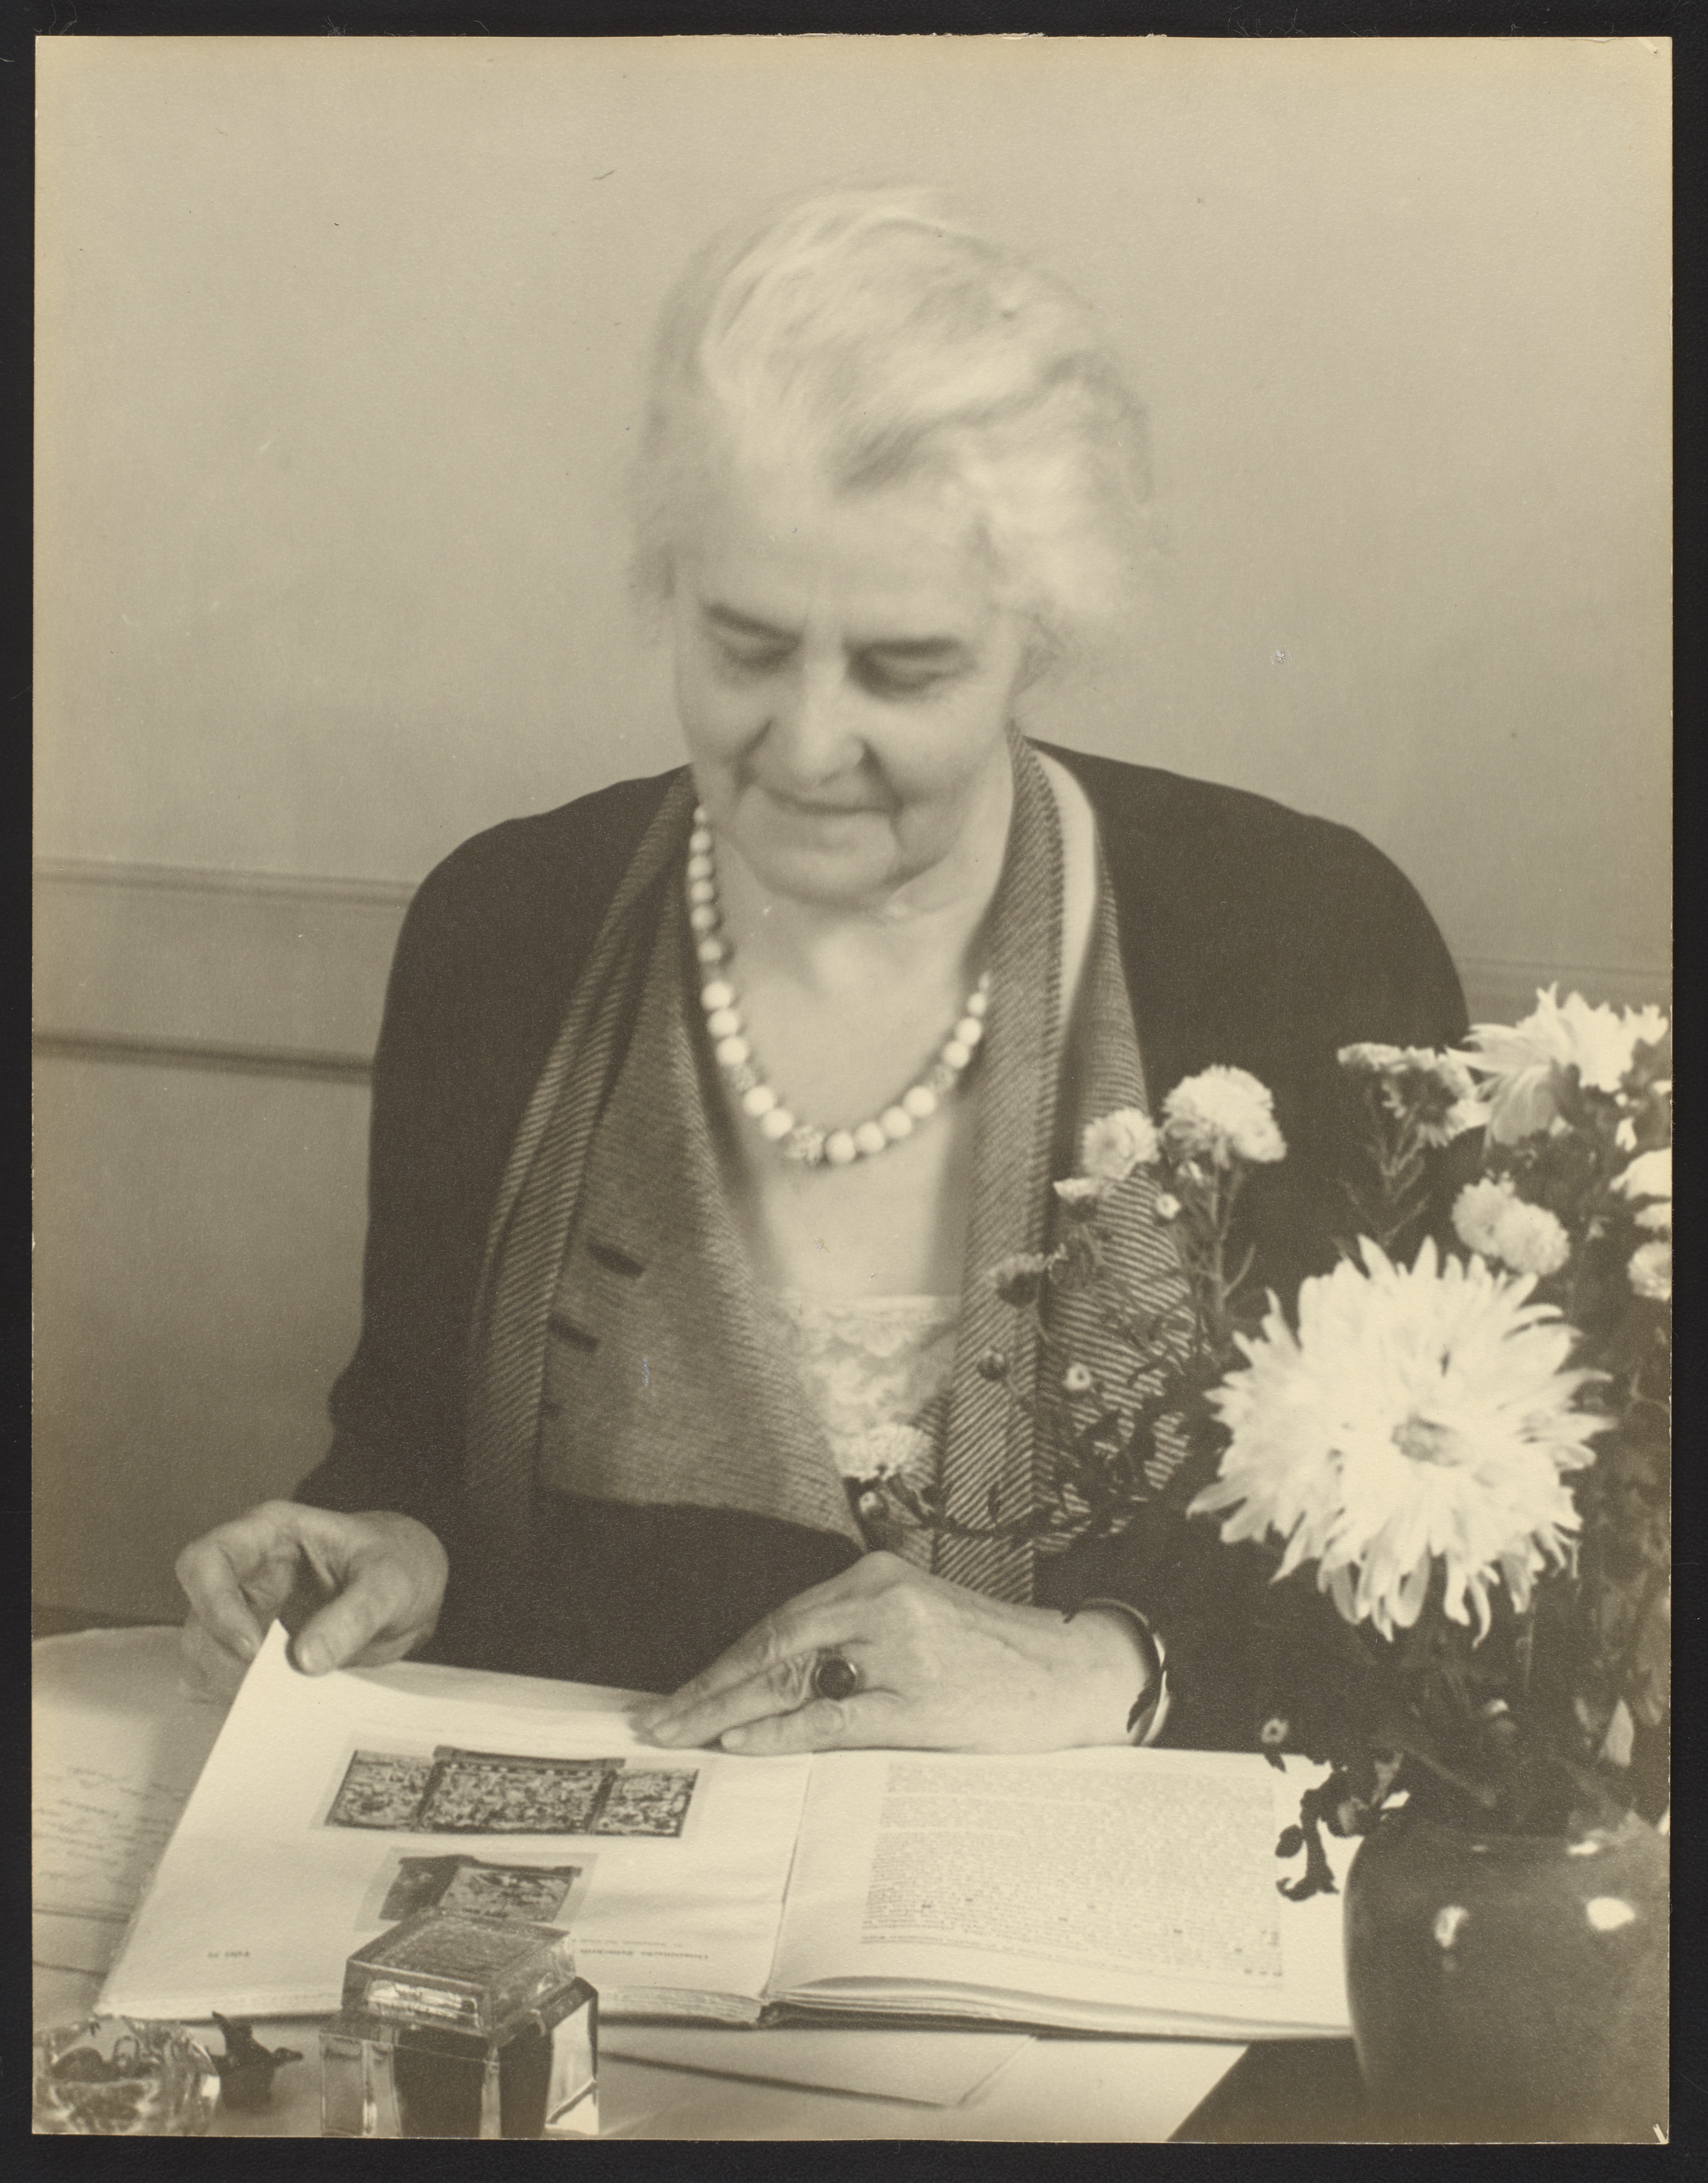 Portrait photograph of Guest seated at a desk. She has a book open and is looking down at it.